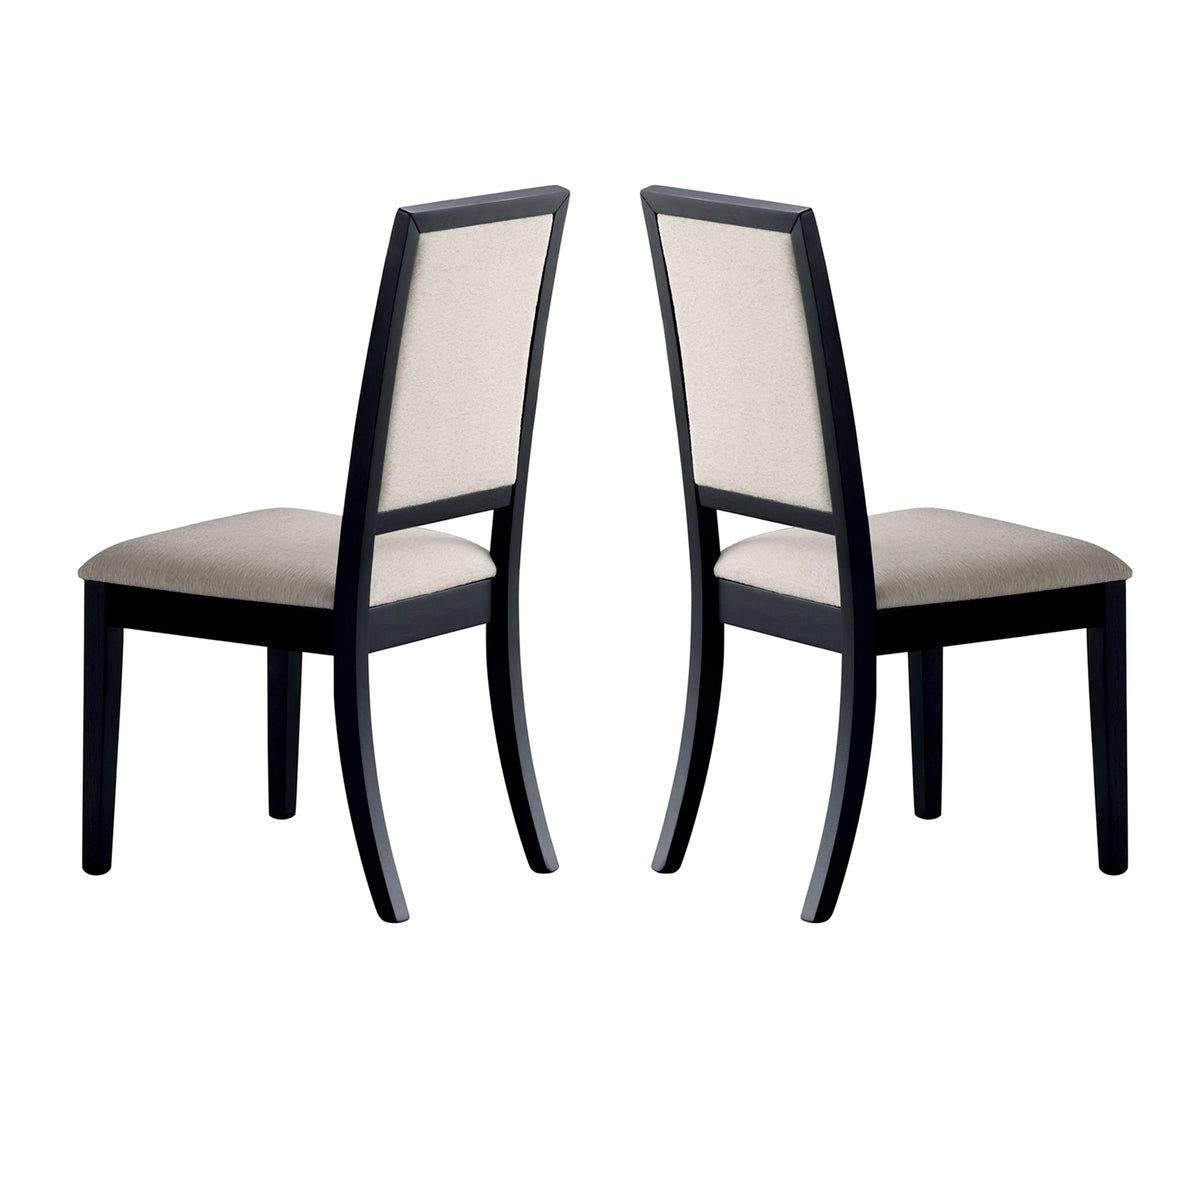 BM69003 Wooden Dining Side Chair With Cream Upholstered seat And Back, Black, Set of 2